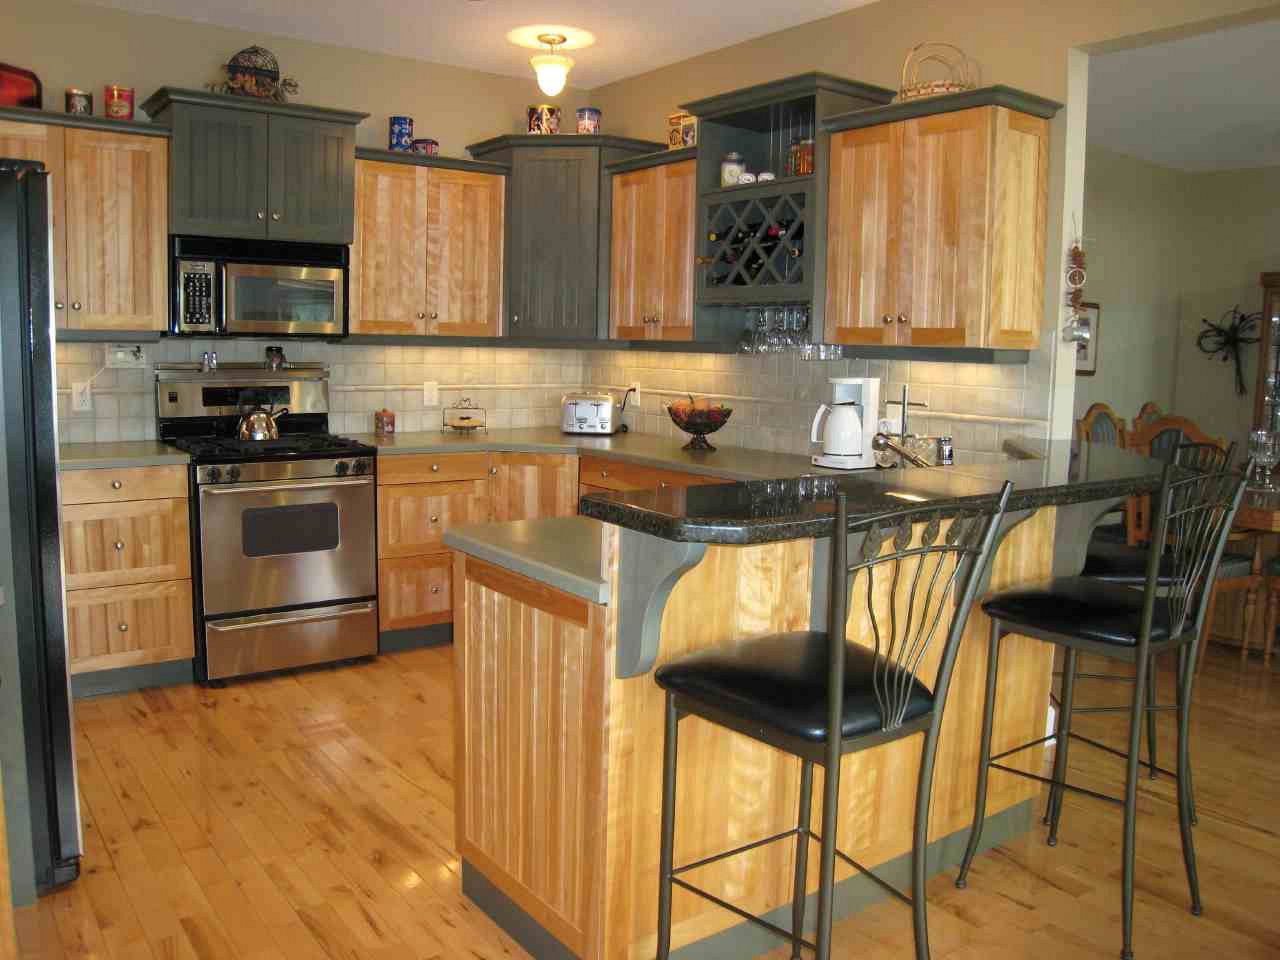 Awesome Paint Colors For Kitchens With Golden Oak Cabinets